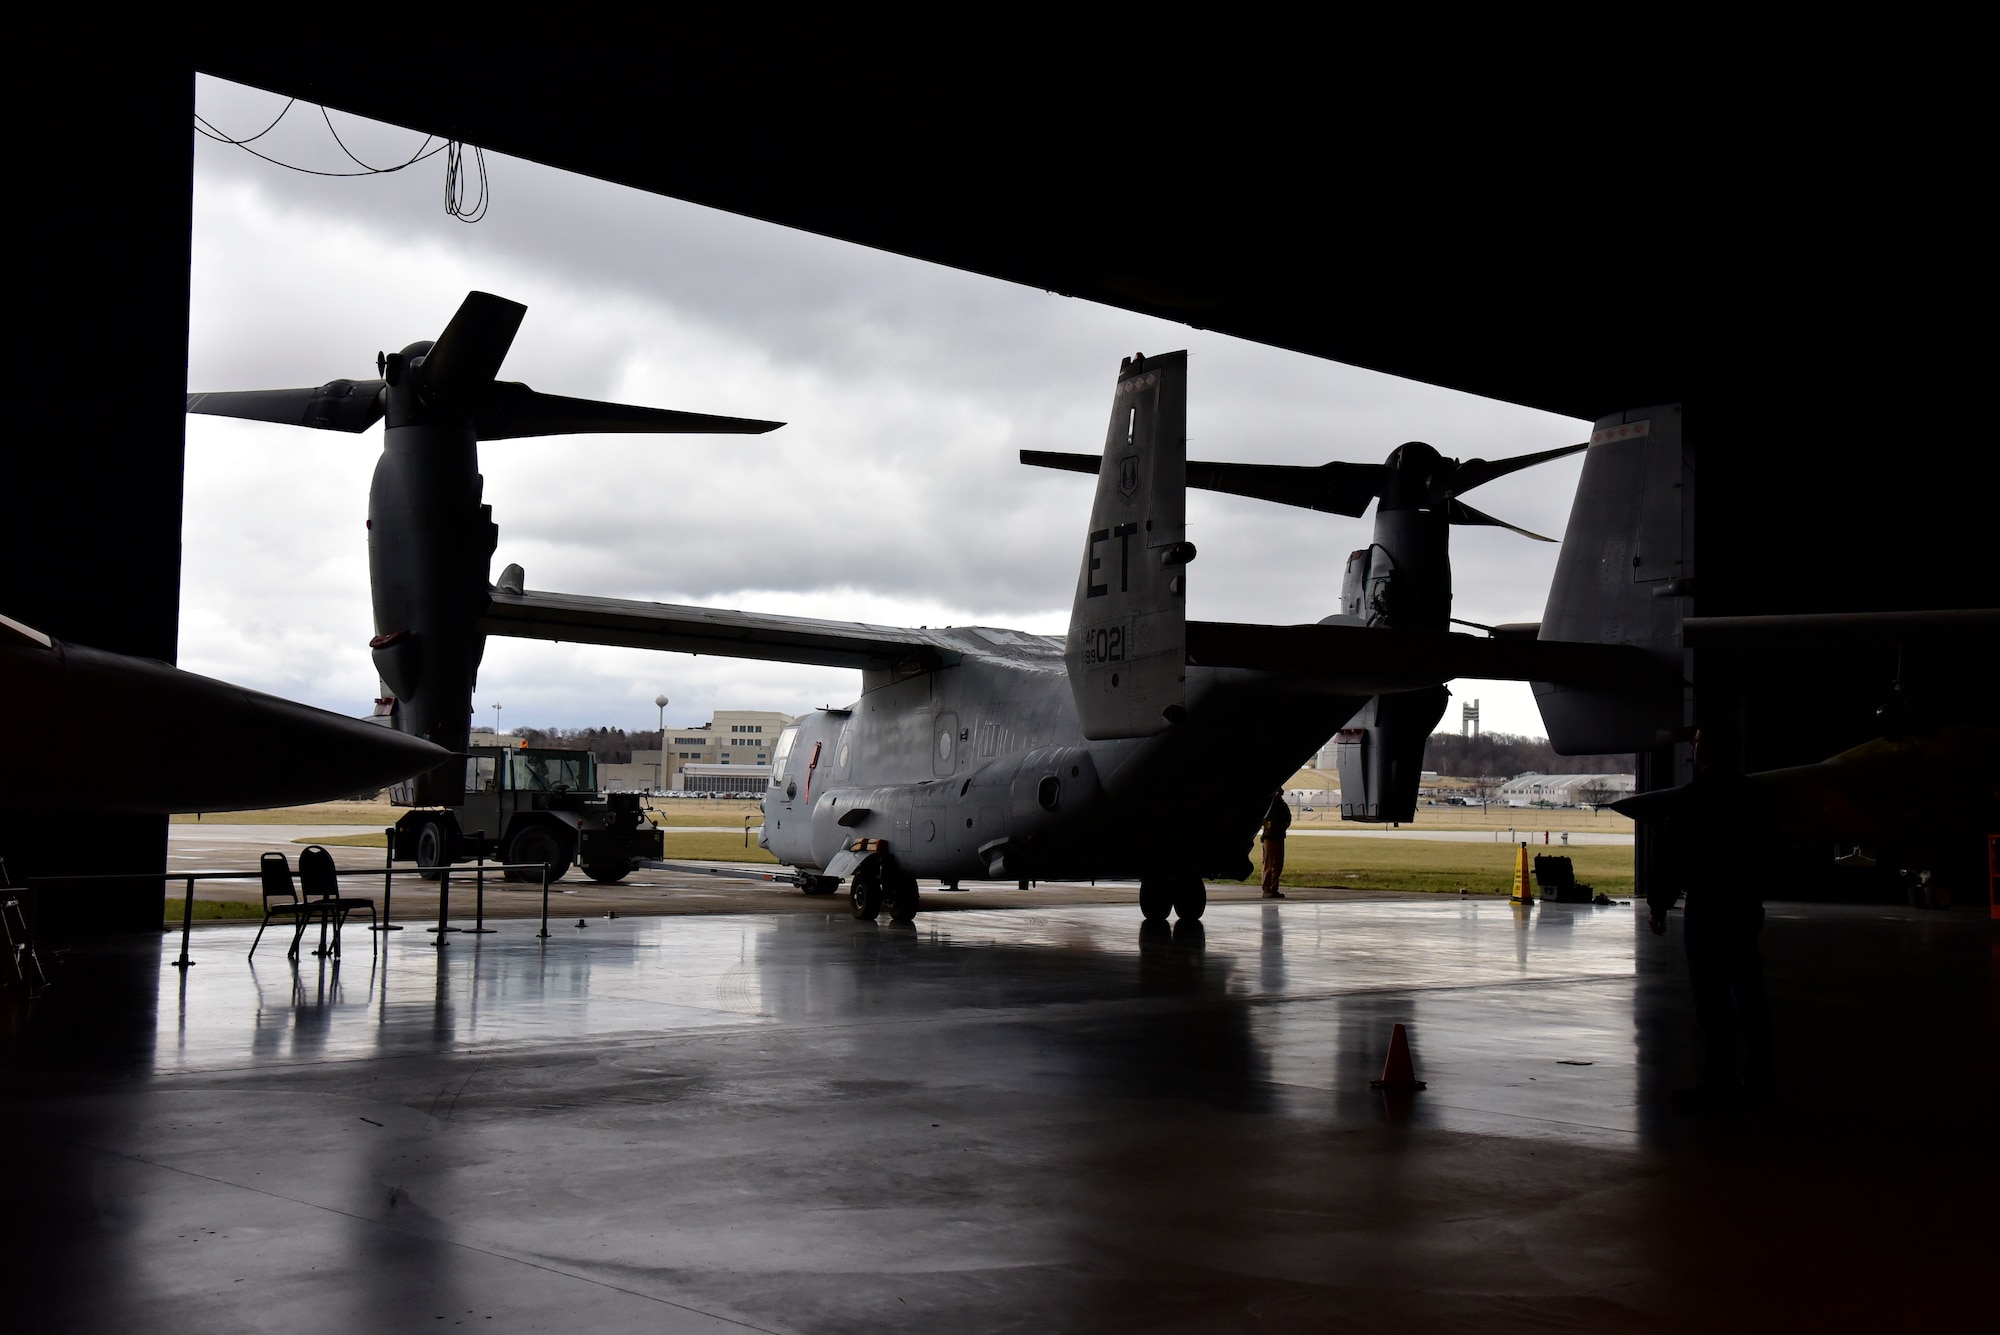 DAYTON, Ohio -- Bell-Boeing CV-22B Osprey being moved into position in the Cold War Gallery at the National Museum of the United States Air Force. The restoration crew members worked as part of a team to complete the gallery reconfiguration on Jan. 26, 2017. (U.S. Air Force photo)